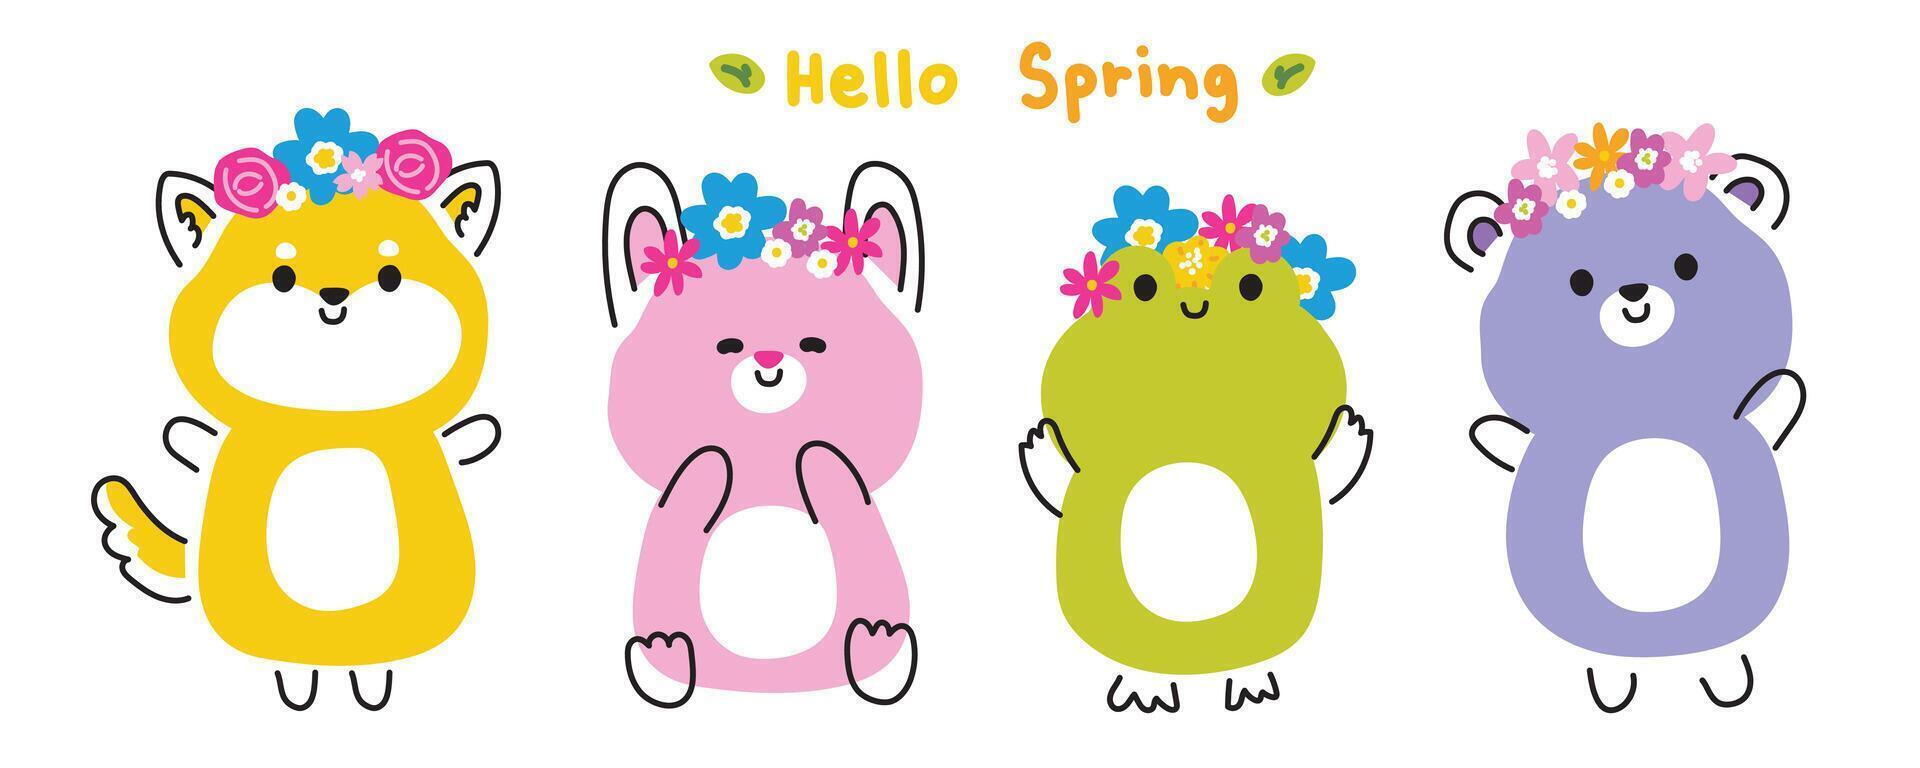 Set of cute animal in spring concept.Animals wear flower crown collection.Shiba inu dog,rabbit,frog,teddy bear hand drawn.Floral.Blooming.Kawaii.Vector.Illustration. vector